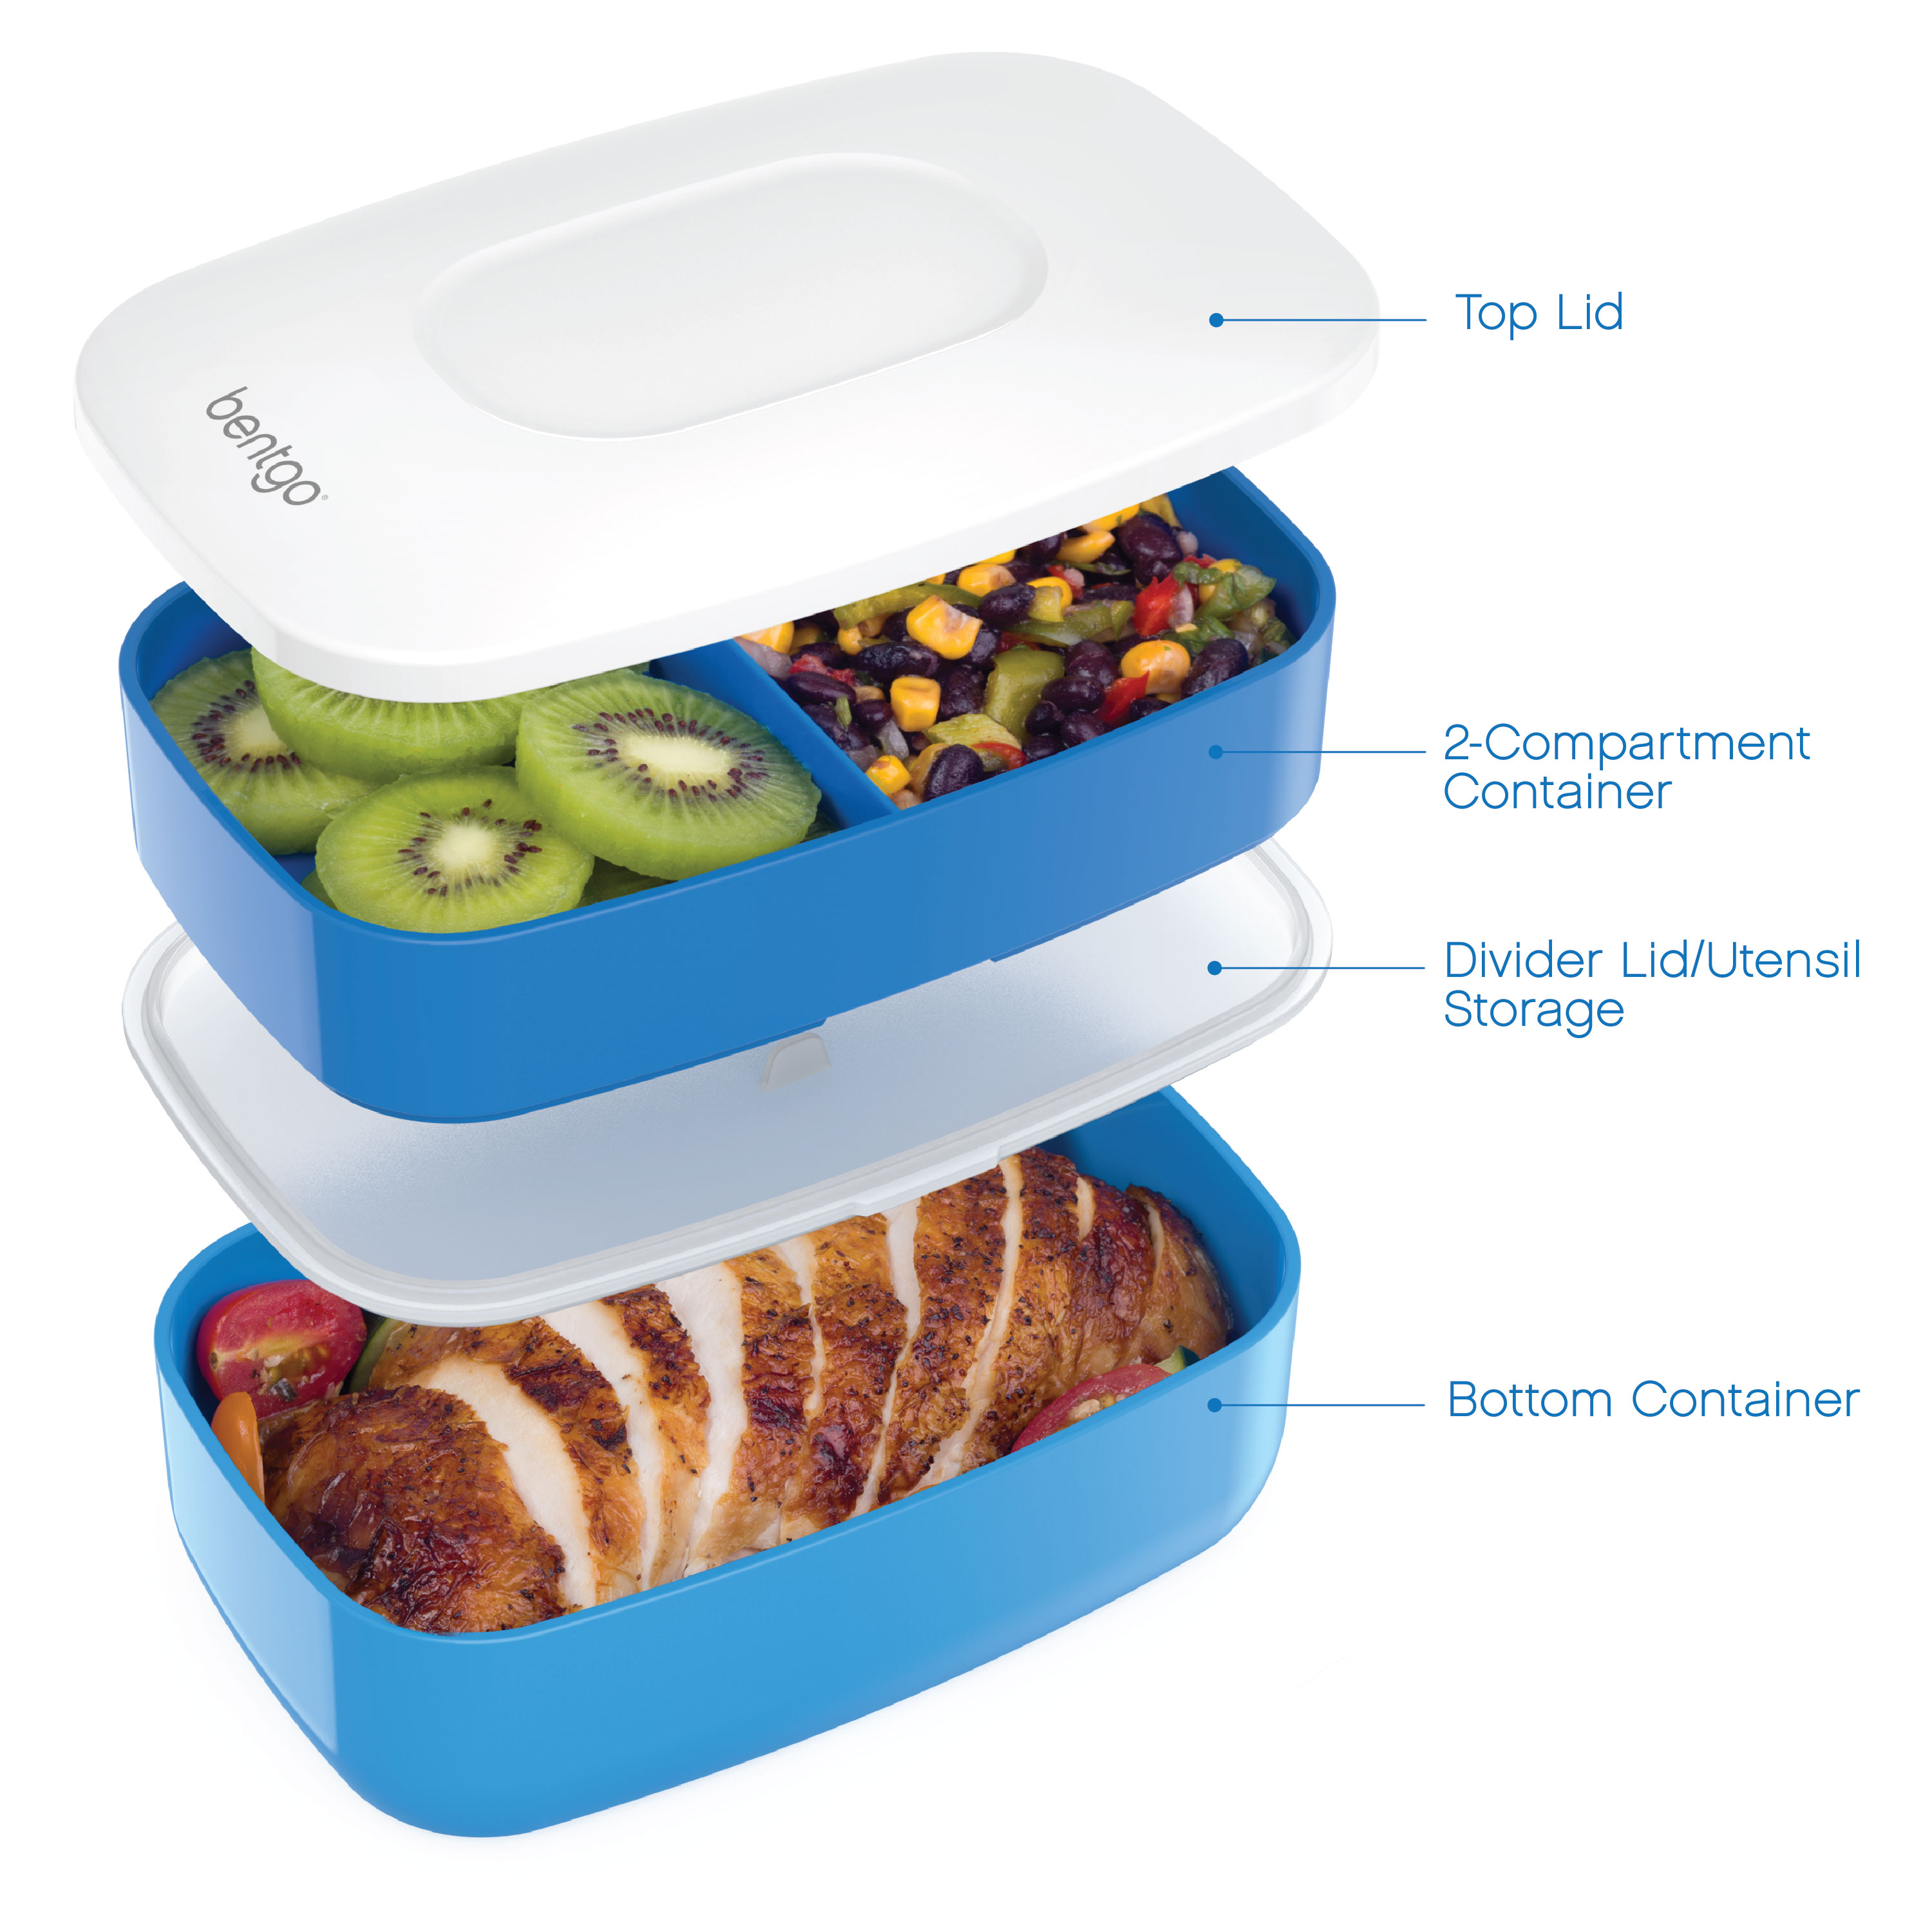 Bentgo Classic (Blue) - All-in-One Stackable Lunch Box Solution - Sleek and Modern Bento Box Design Includes 2 Stackable Containers, Built-in Plastic Silverware, and Sealing Strap - image 4 of 5